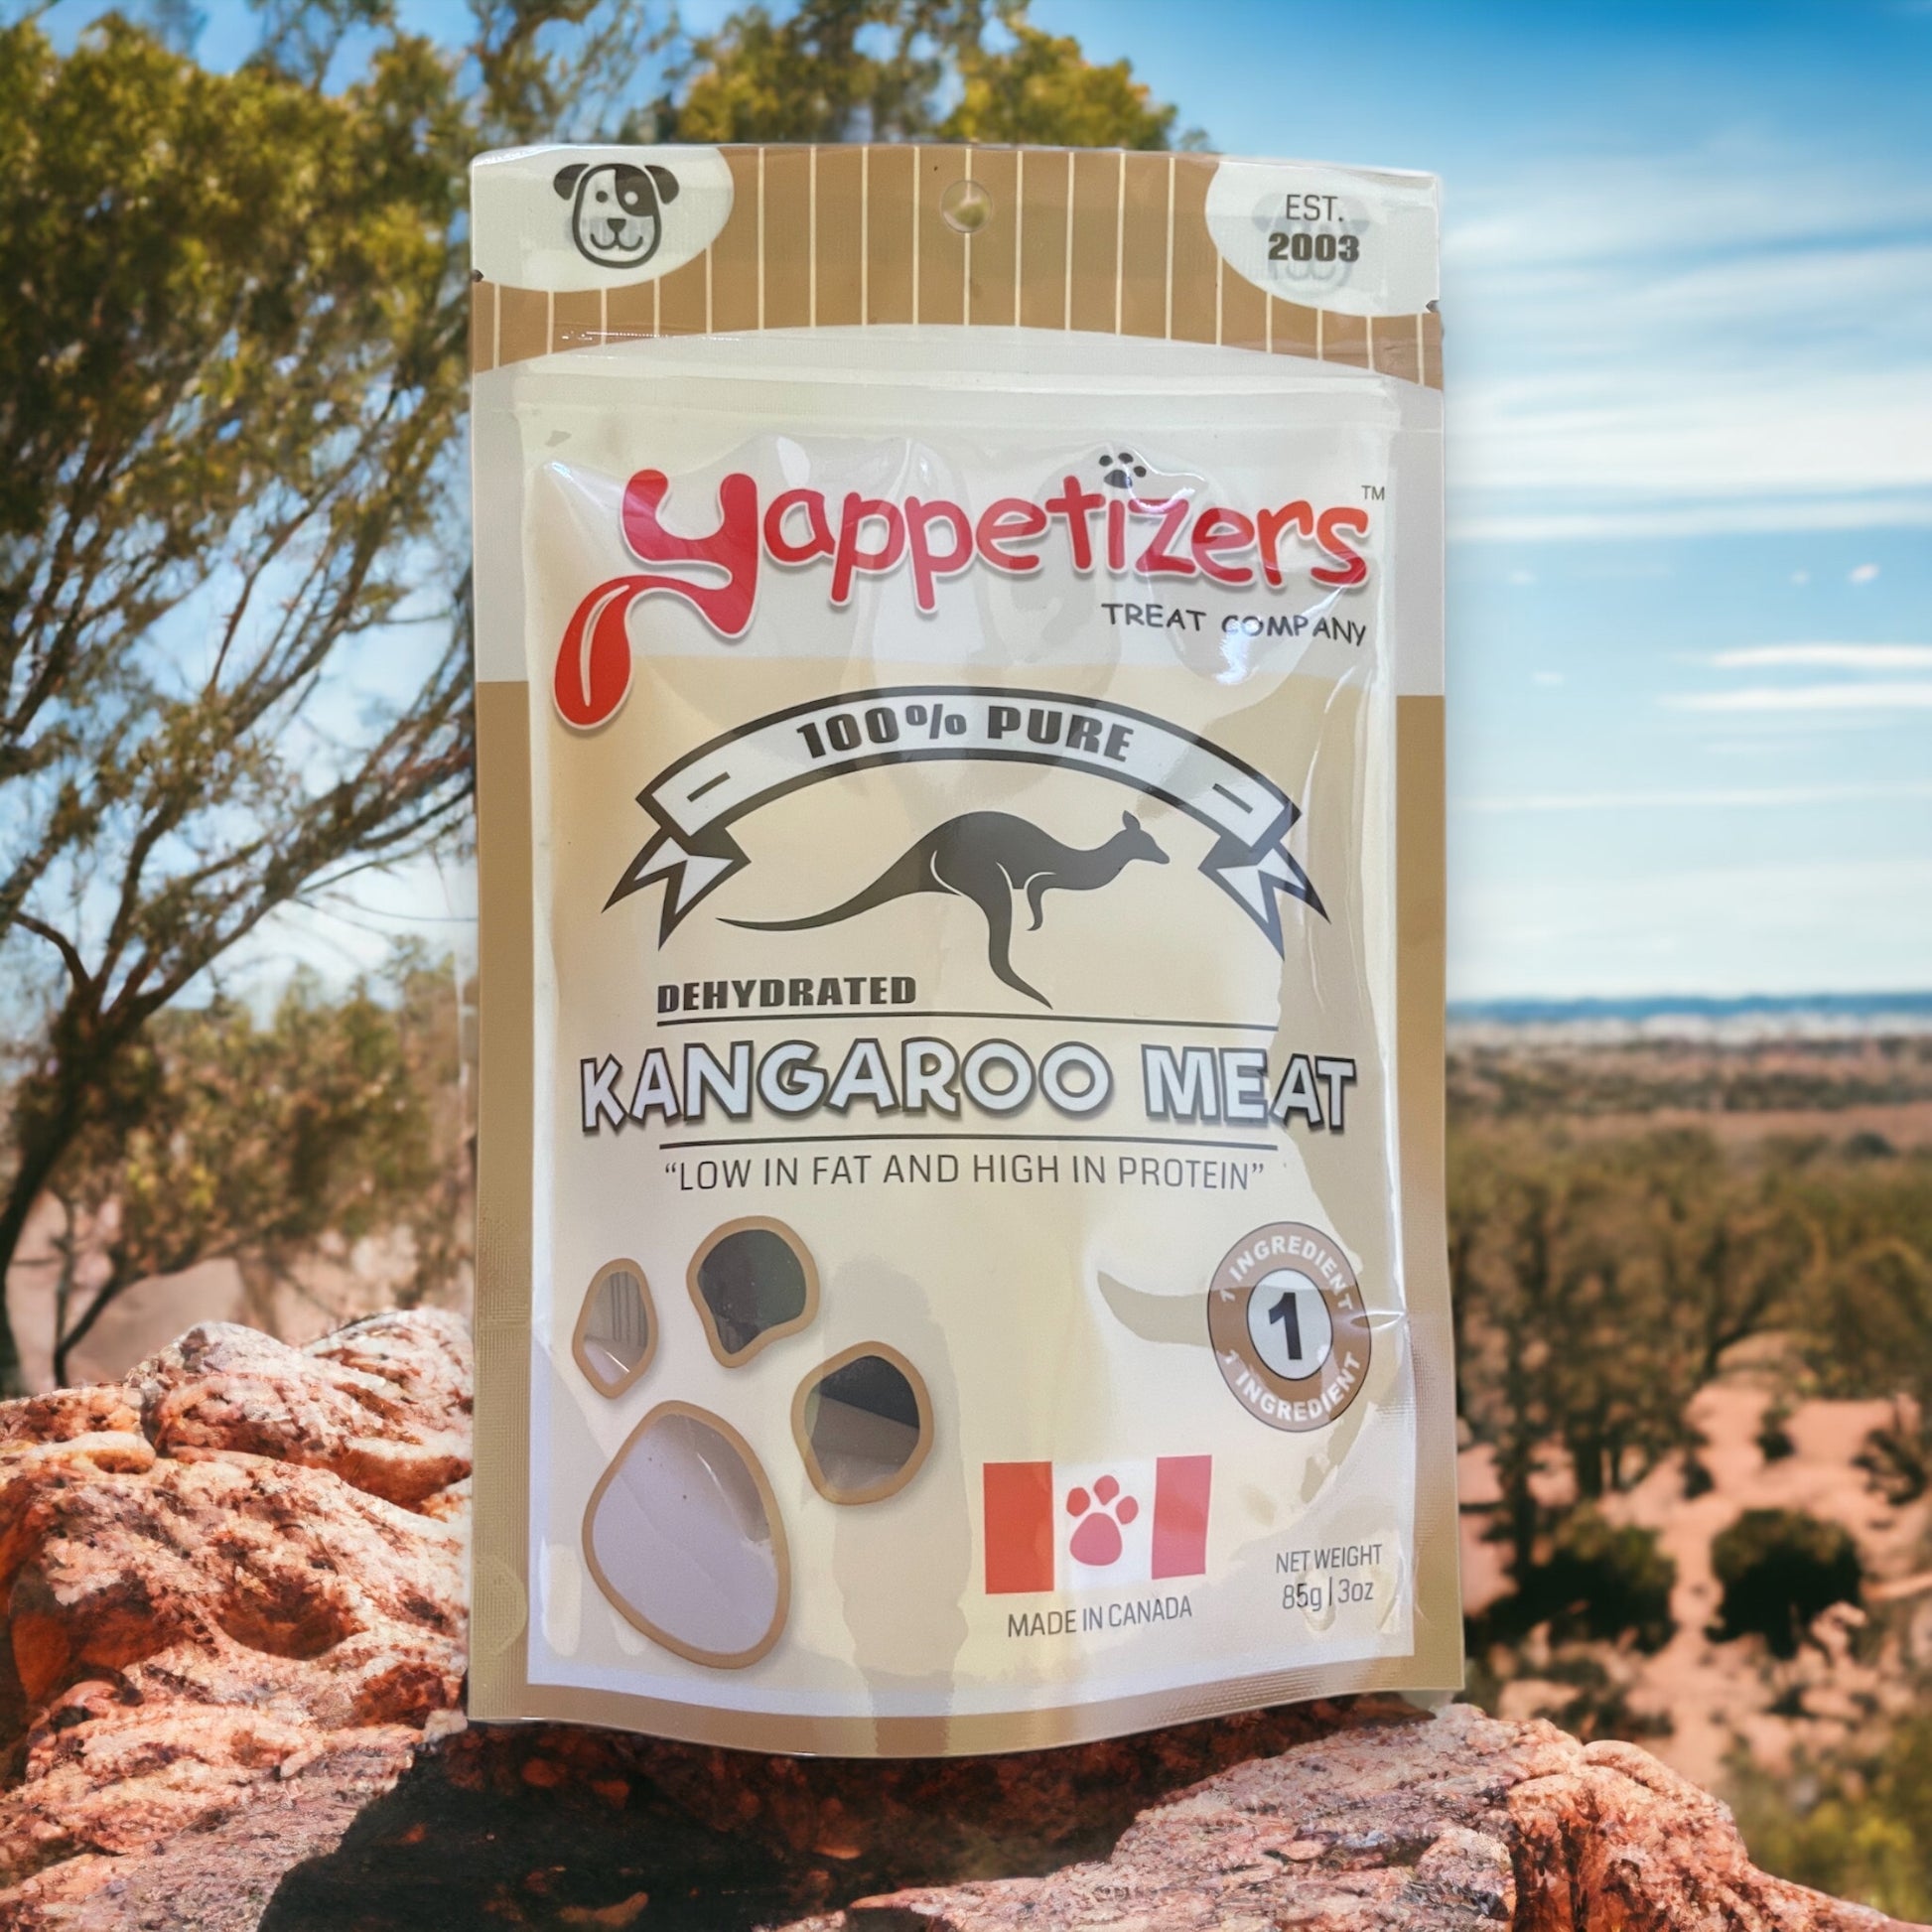 An 85g/3oz bag of natural dehydrated kangaroo made in Canada by Yappetizers. The treat bag is on a rock in the Australian outback.